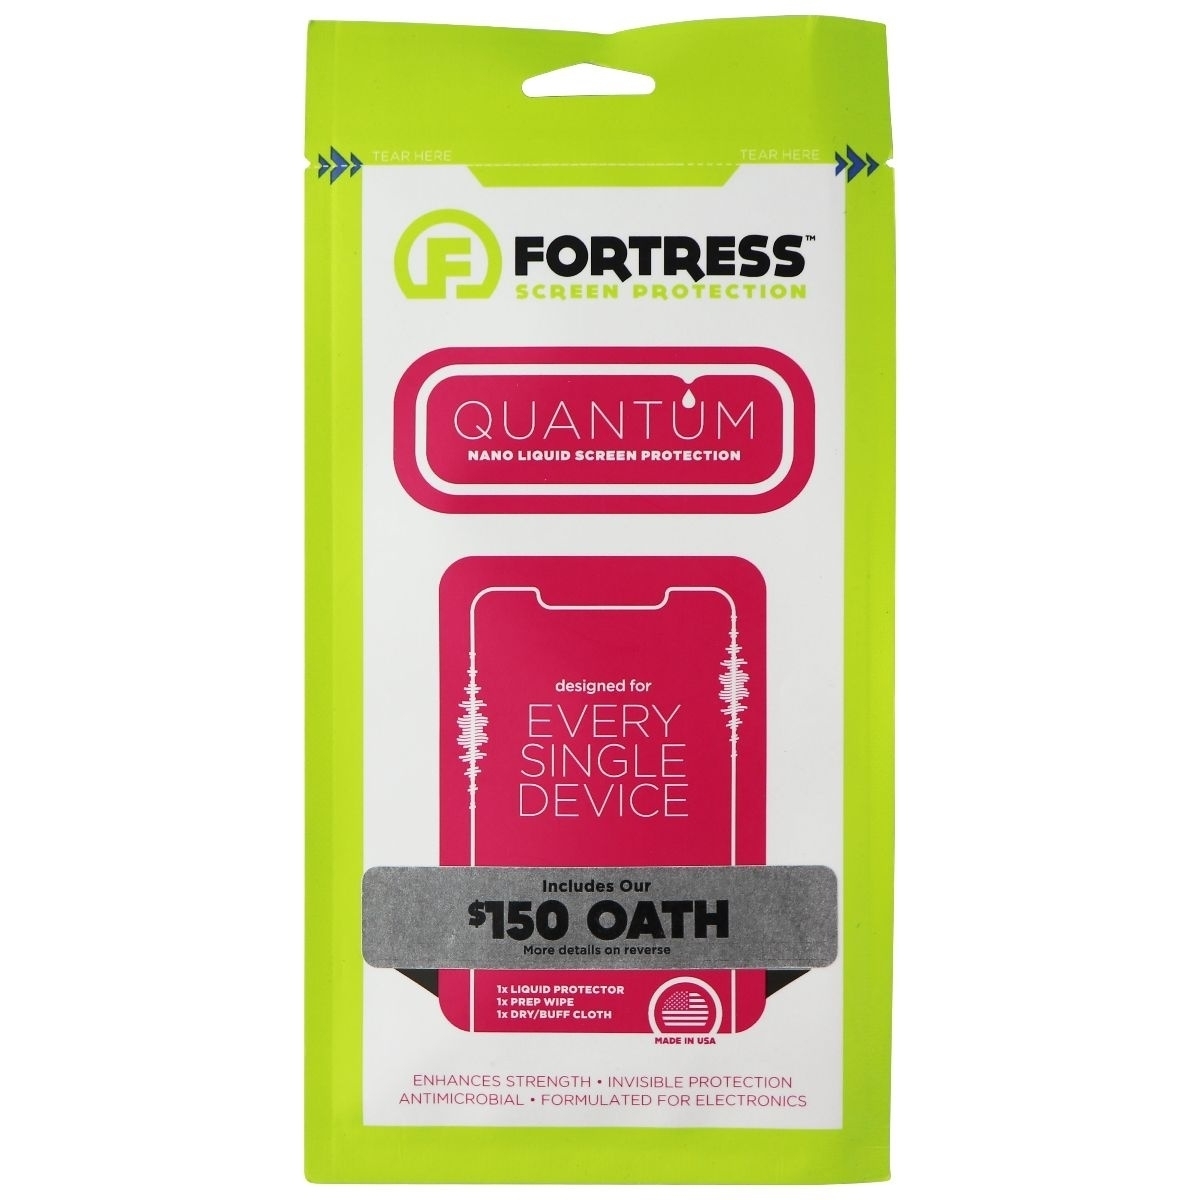 Fortress QUANTUM Nano Liquid Screen Protection For Any Device (Single Use)